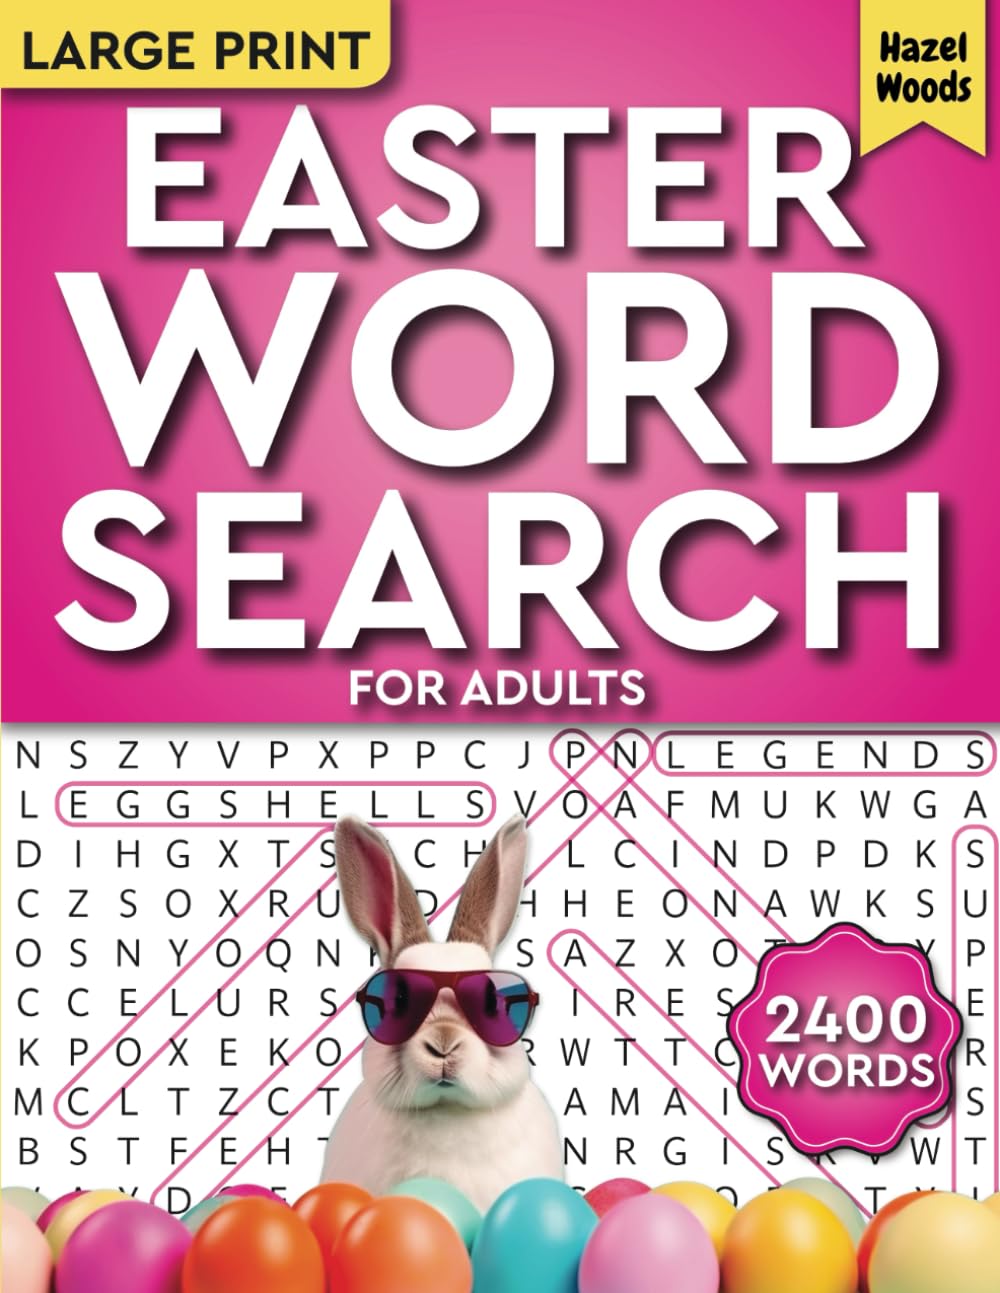 Easter Word Search for Adults Large Print (2400 Words): Celebrate Spring with This Inspirational & Positive Puzzle Book for Adults & Seniors - A ... & Trivia (Memorable Holiday Word Finds)